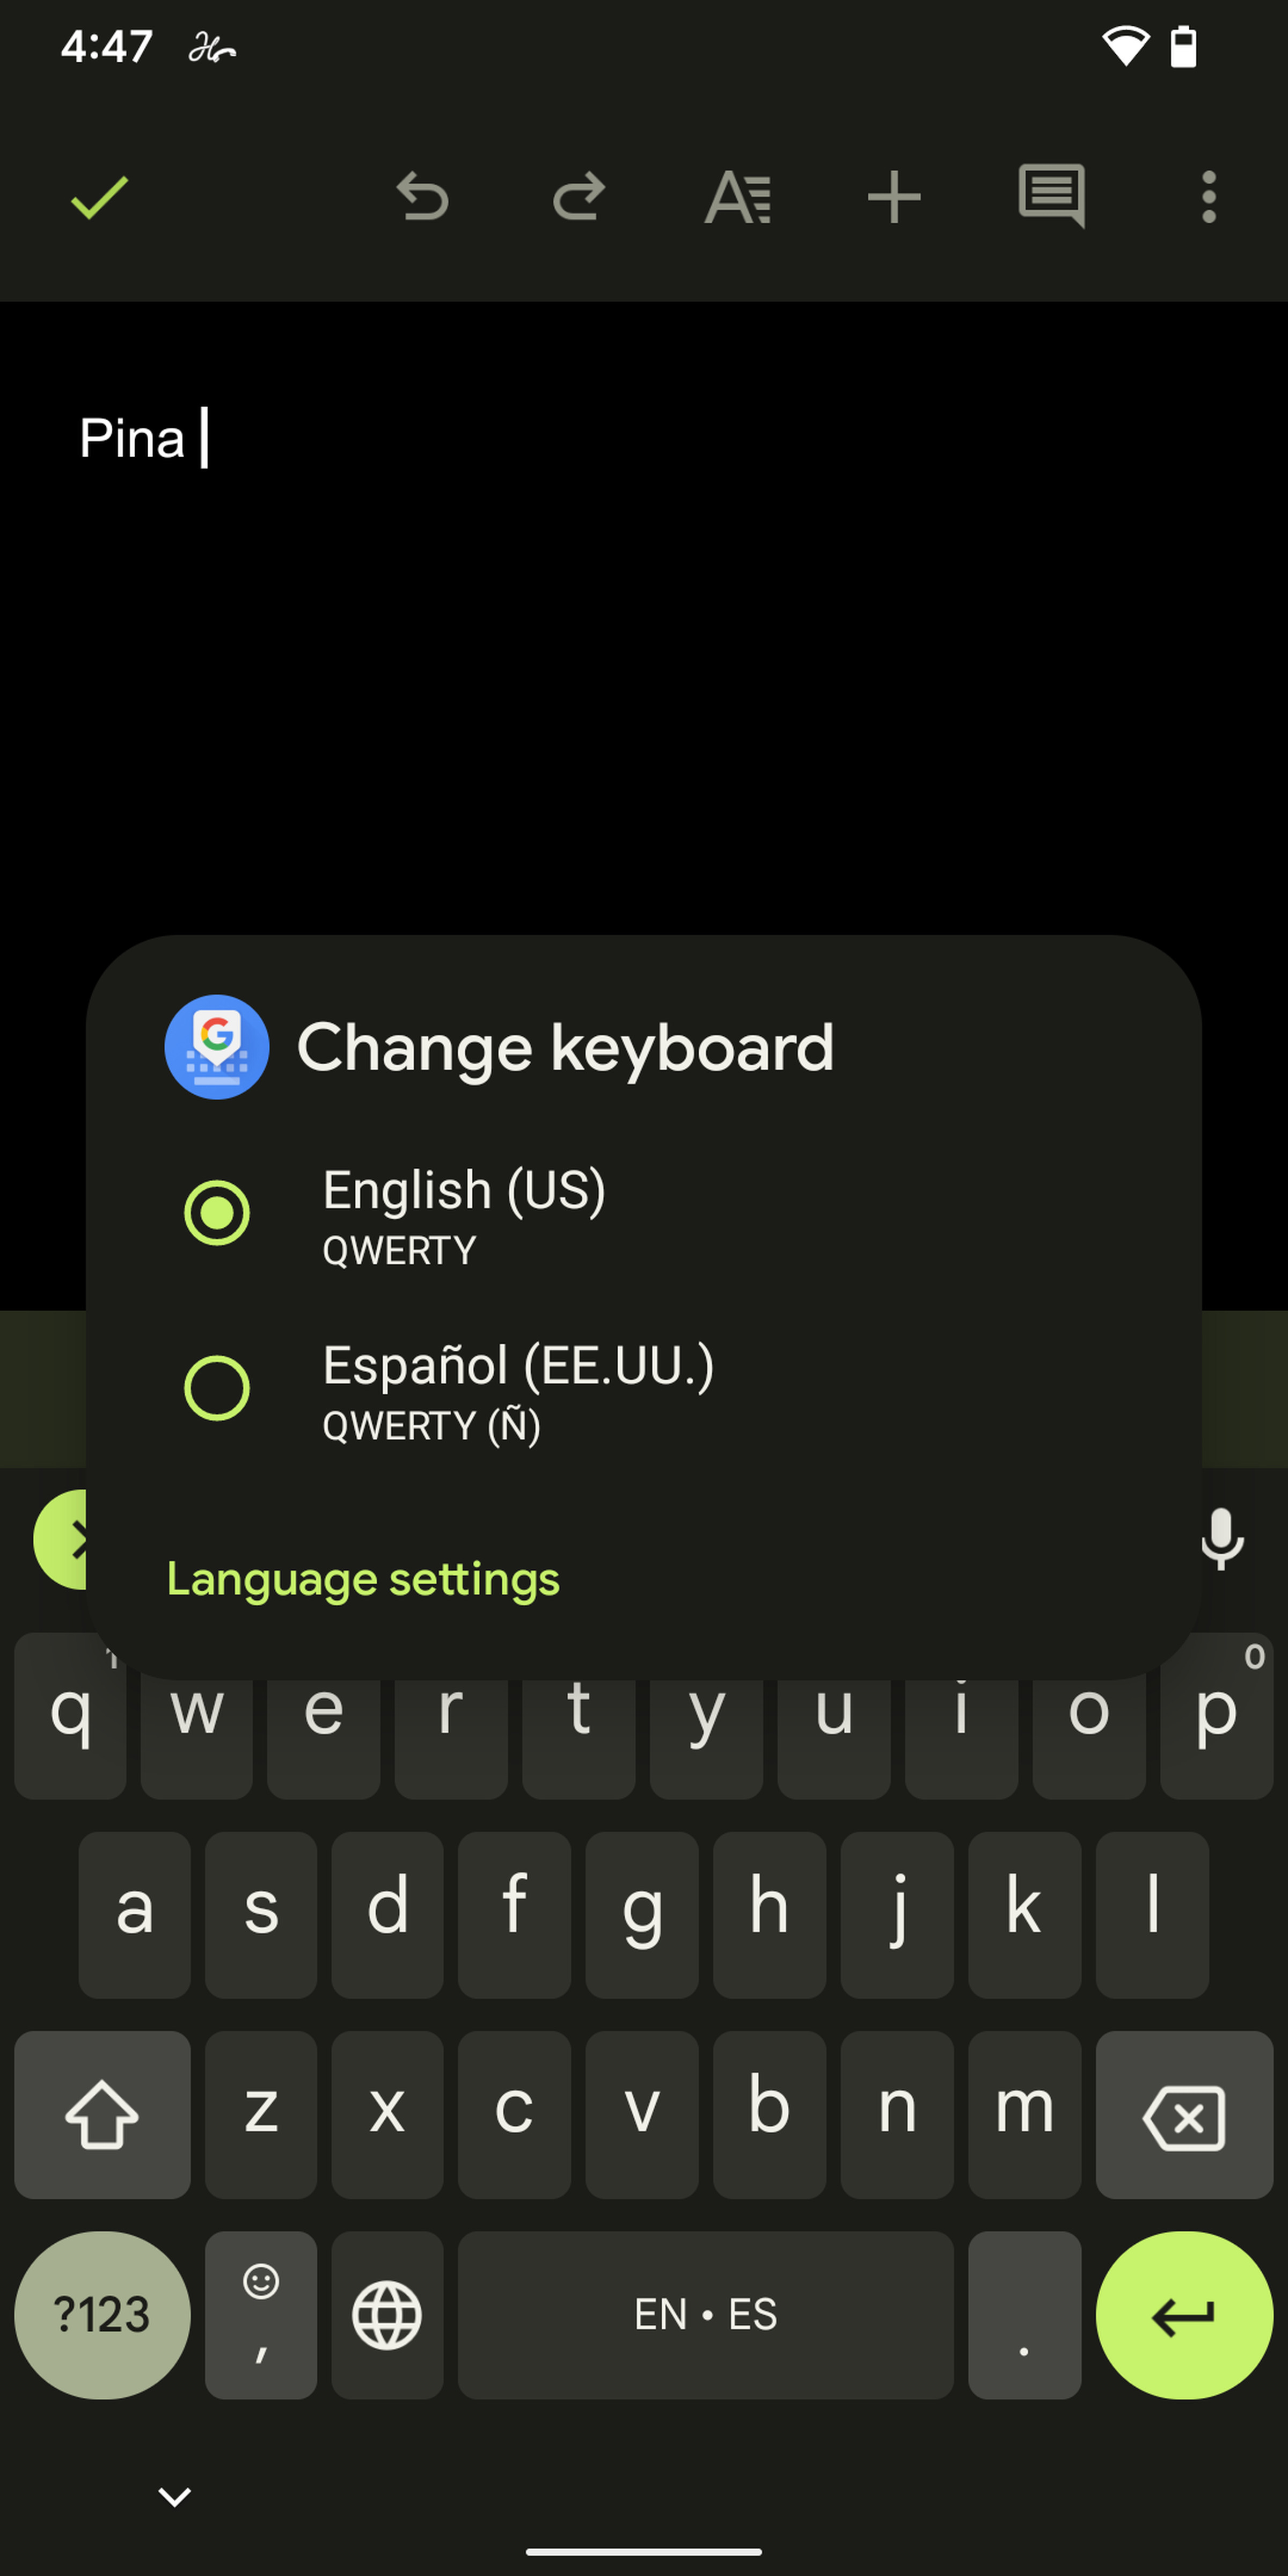 Long-press on the space bar to change language settings.